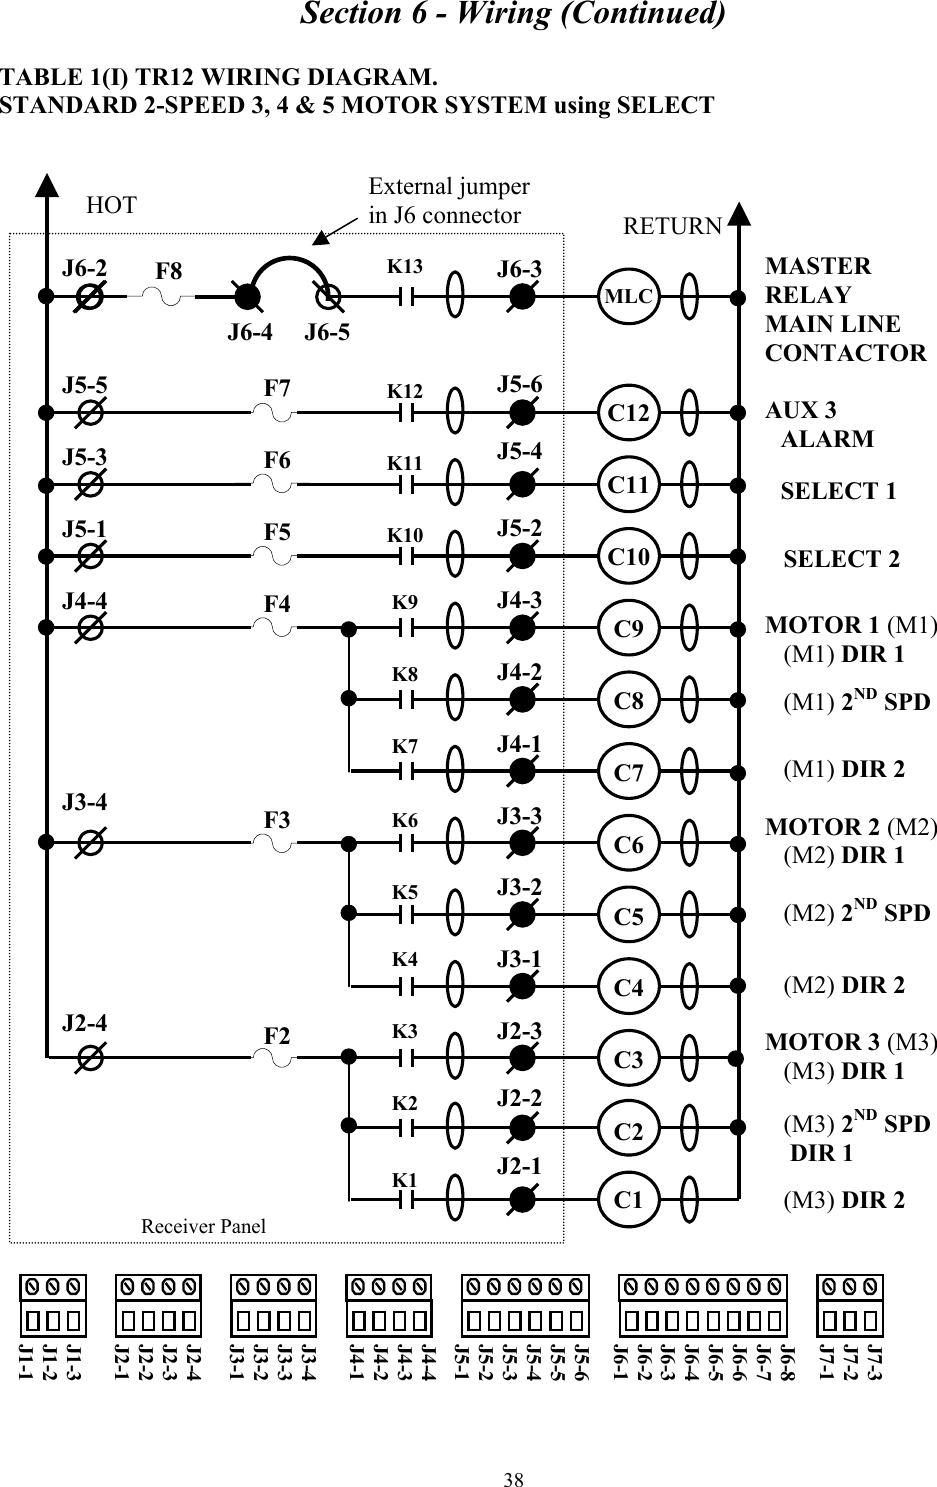 Section 6 - Wiring (Continued) 38 TABLE 1(I) TR12 WIRING DIAGRAM. STANDARD 2-SPEED 3, 4 &amp; 5 MOTOR SYSTEM using SELECT   MASTER  RELAY MAIN LINE CONTACTOR  AUX 3    ALARM     SELECT 1                  SELECT 2     MOTOR 1 (M1)    (M1) DIR 1     (M1) 2ND SPD                     (M1) DIR 2  MOTOR 2 (M2)    (M2) DIR 1     (M2) 2ND SPD                     (M2) DIR 2  MOTOR 3 (M3)    (M3) DIR 1     (M3) 2ND SPD       DIR 1            (M3) DIR 2      Receiver Panel J6-2    J5-5  J5-3  J5-1  J4-4      J3-4        J2-4 J6-3    J5-6  J5-4   J5-2  J4-3  J4-2  J4-1  J3-3  J3-2  J3-1  J2-3  J2-2  J2-1 HOT  RETURN K13     K12   K11   K10   K9   K8   K7   K6   K5   K4   K3   K2   K1 MLC    C12  C11  C10  C9  C8  C7  C6  C5  C4  C3  C2  C1     F7  F6  F5  F4      F3        F2  J7-3 J7-2 J7-1  J6-8 J6-7 J6-6 J6-5 J6-4 J6-3 J6-2 J6-1   J5-6 J5-5 J5-4 J5-3 J5-2 J5-1  J4-4 J4-3 J4-2 J4-1  J3-4 J3-3 J3-2 J3-1  J2-4 J2-3 J2-2 J2-1  J1-3 J1-2 J1-1 External jumper in J6 connector J6-4     J6-5 F8 